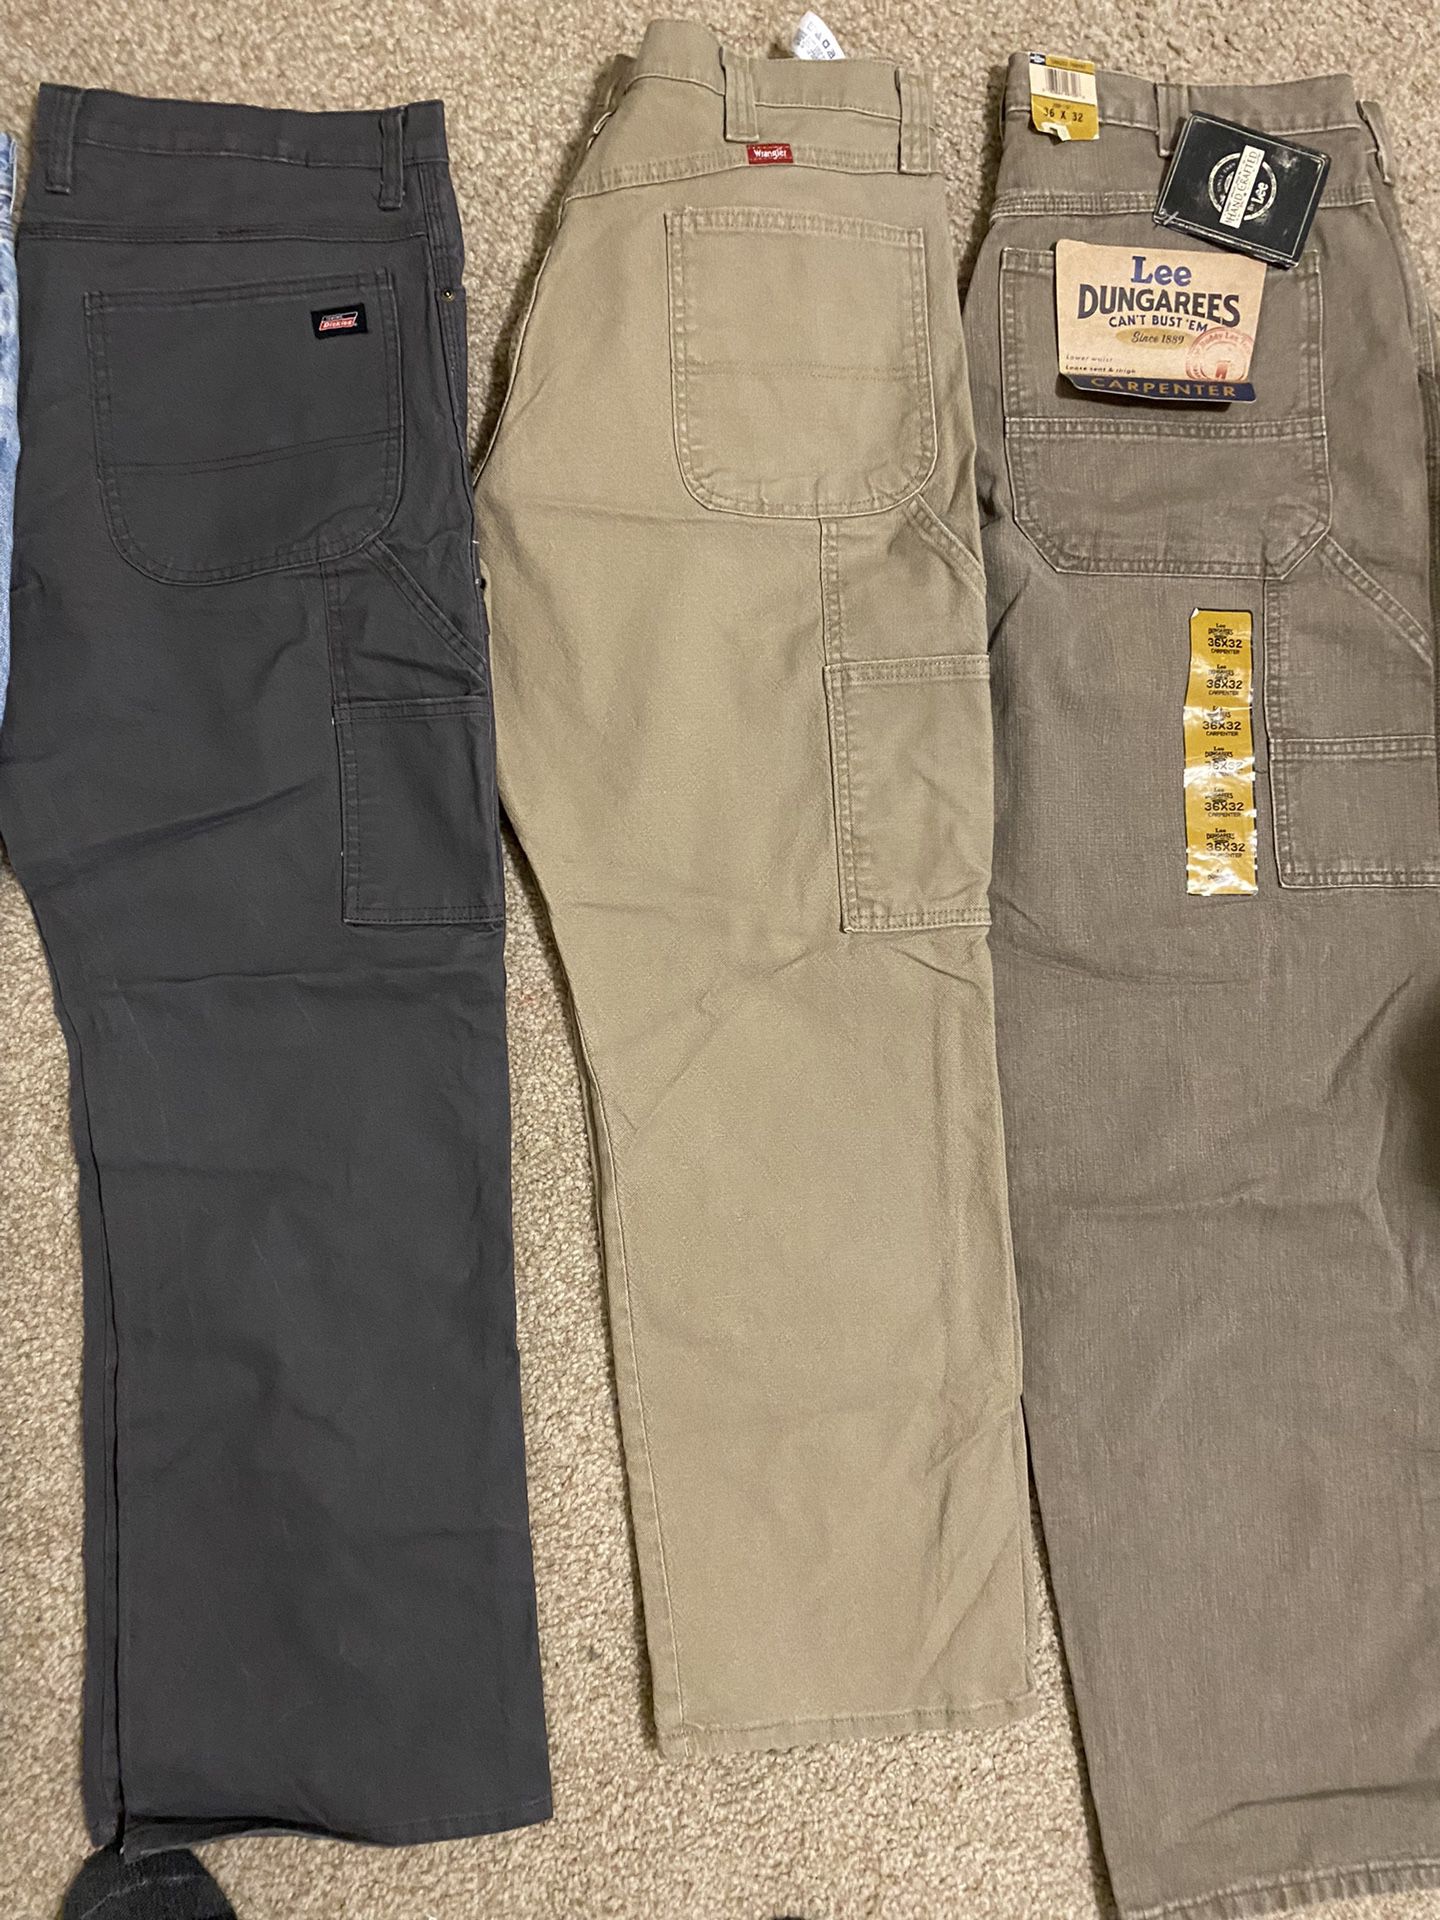 Carpenter Pants for work like new ,levi strauss,dickies,wangler,Lee Dungarees all for $40